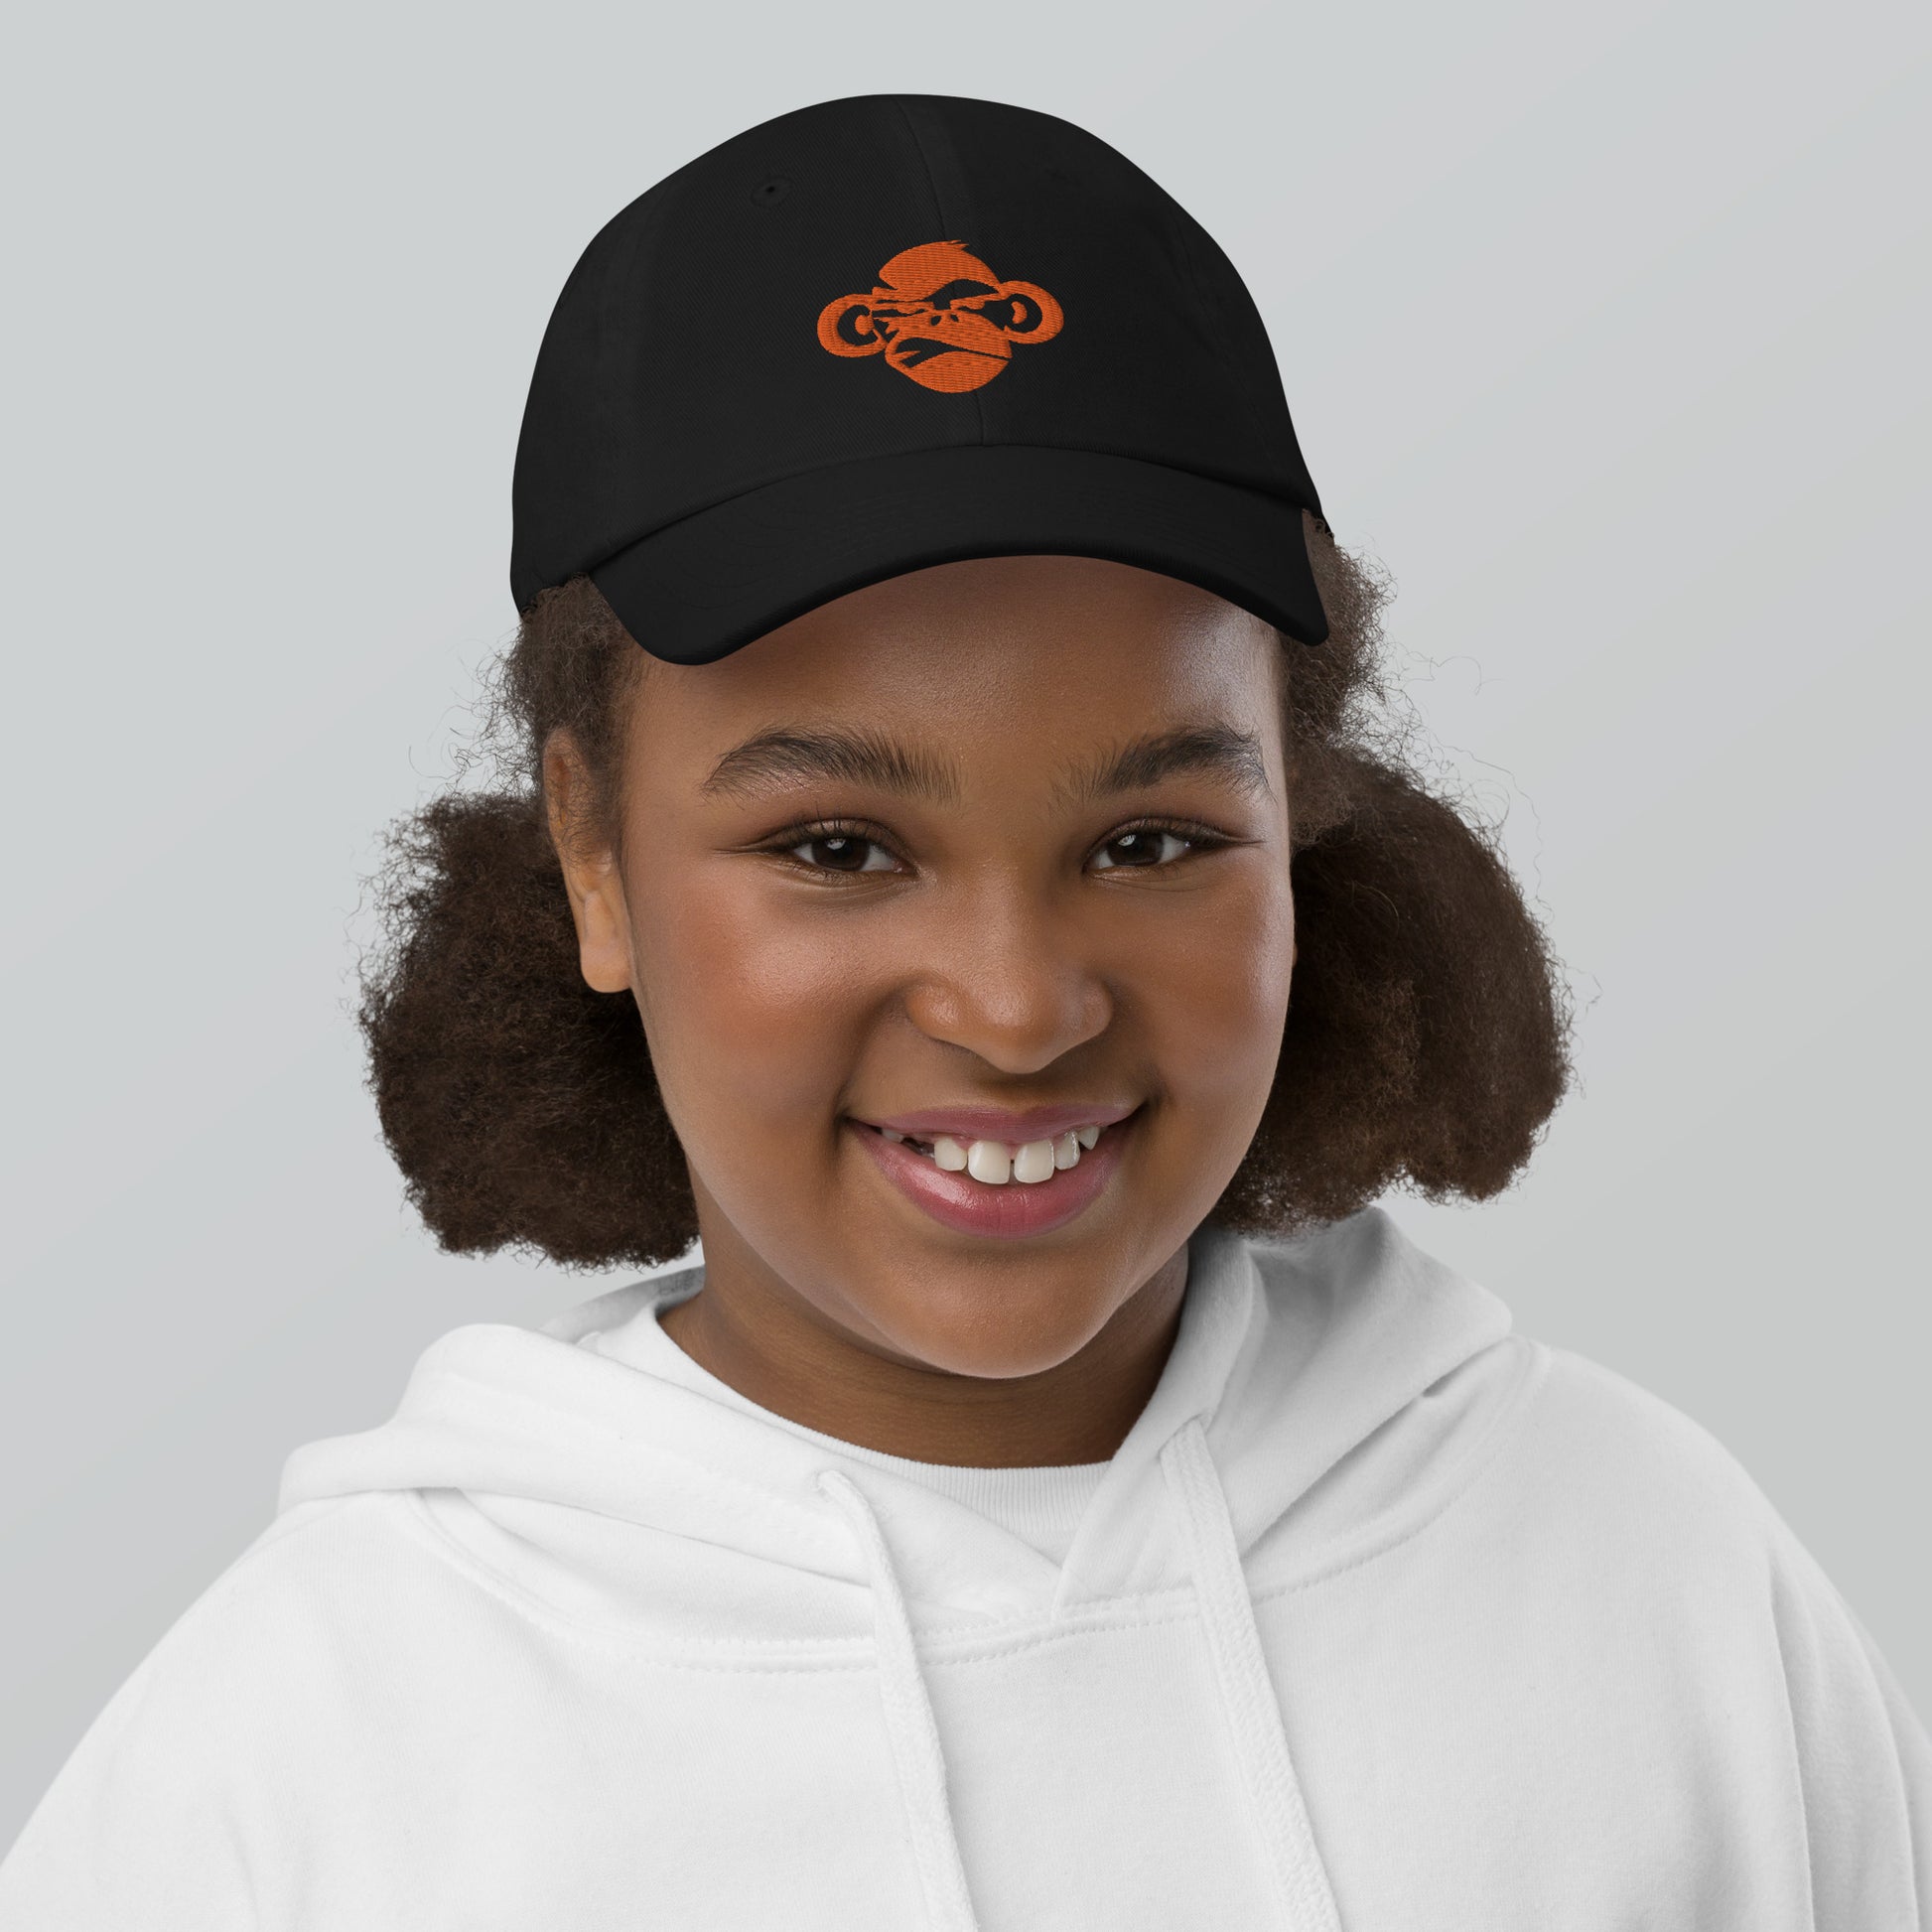 Youth with black baseball cap with a print of a head of a monkey in color brown